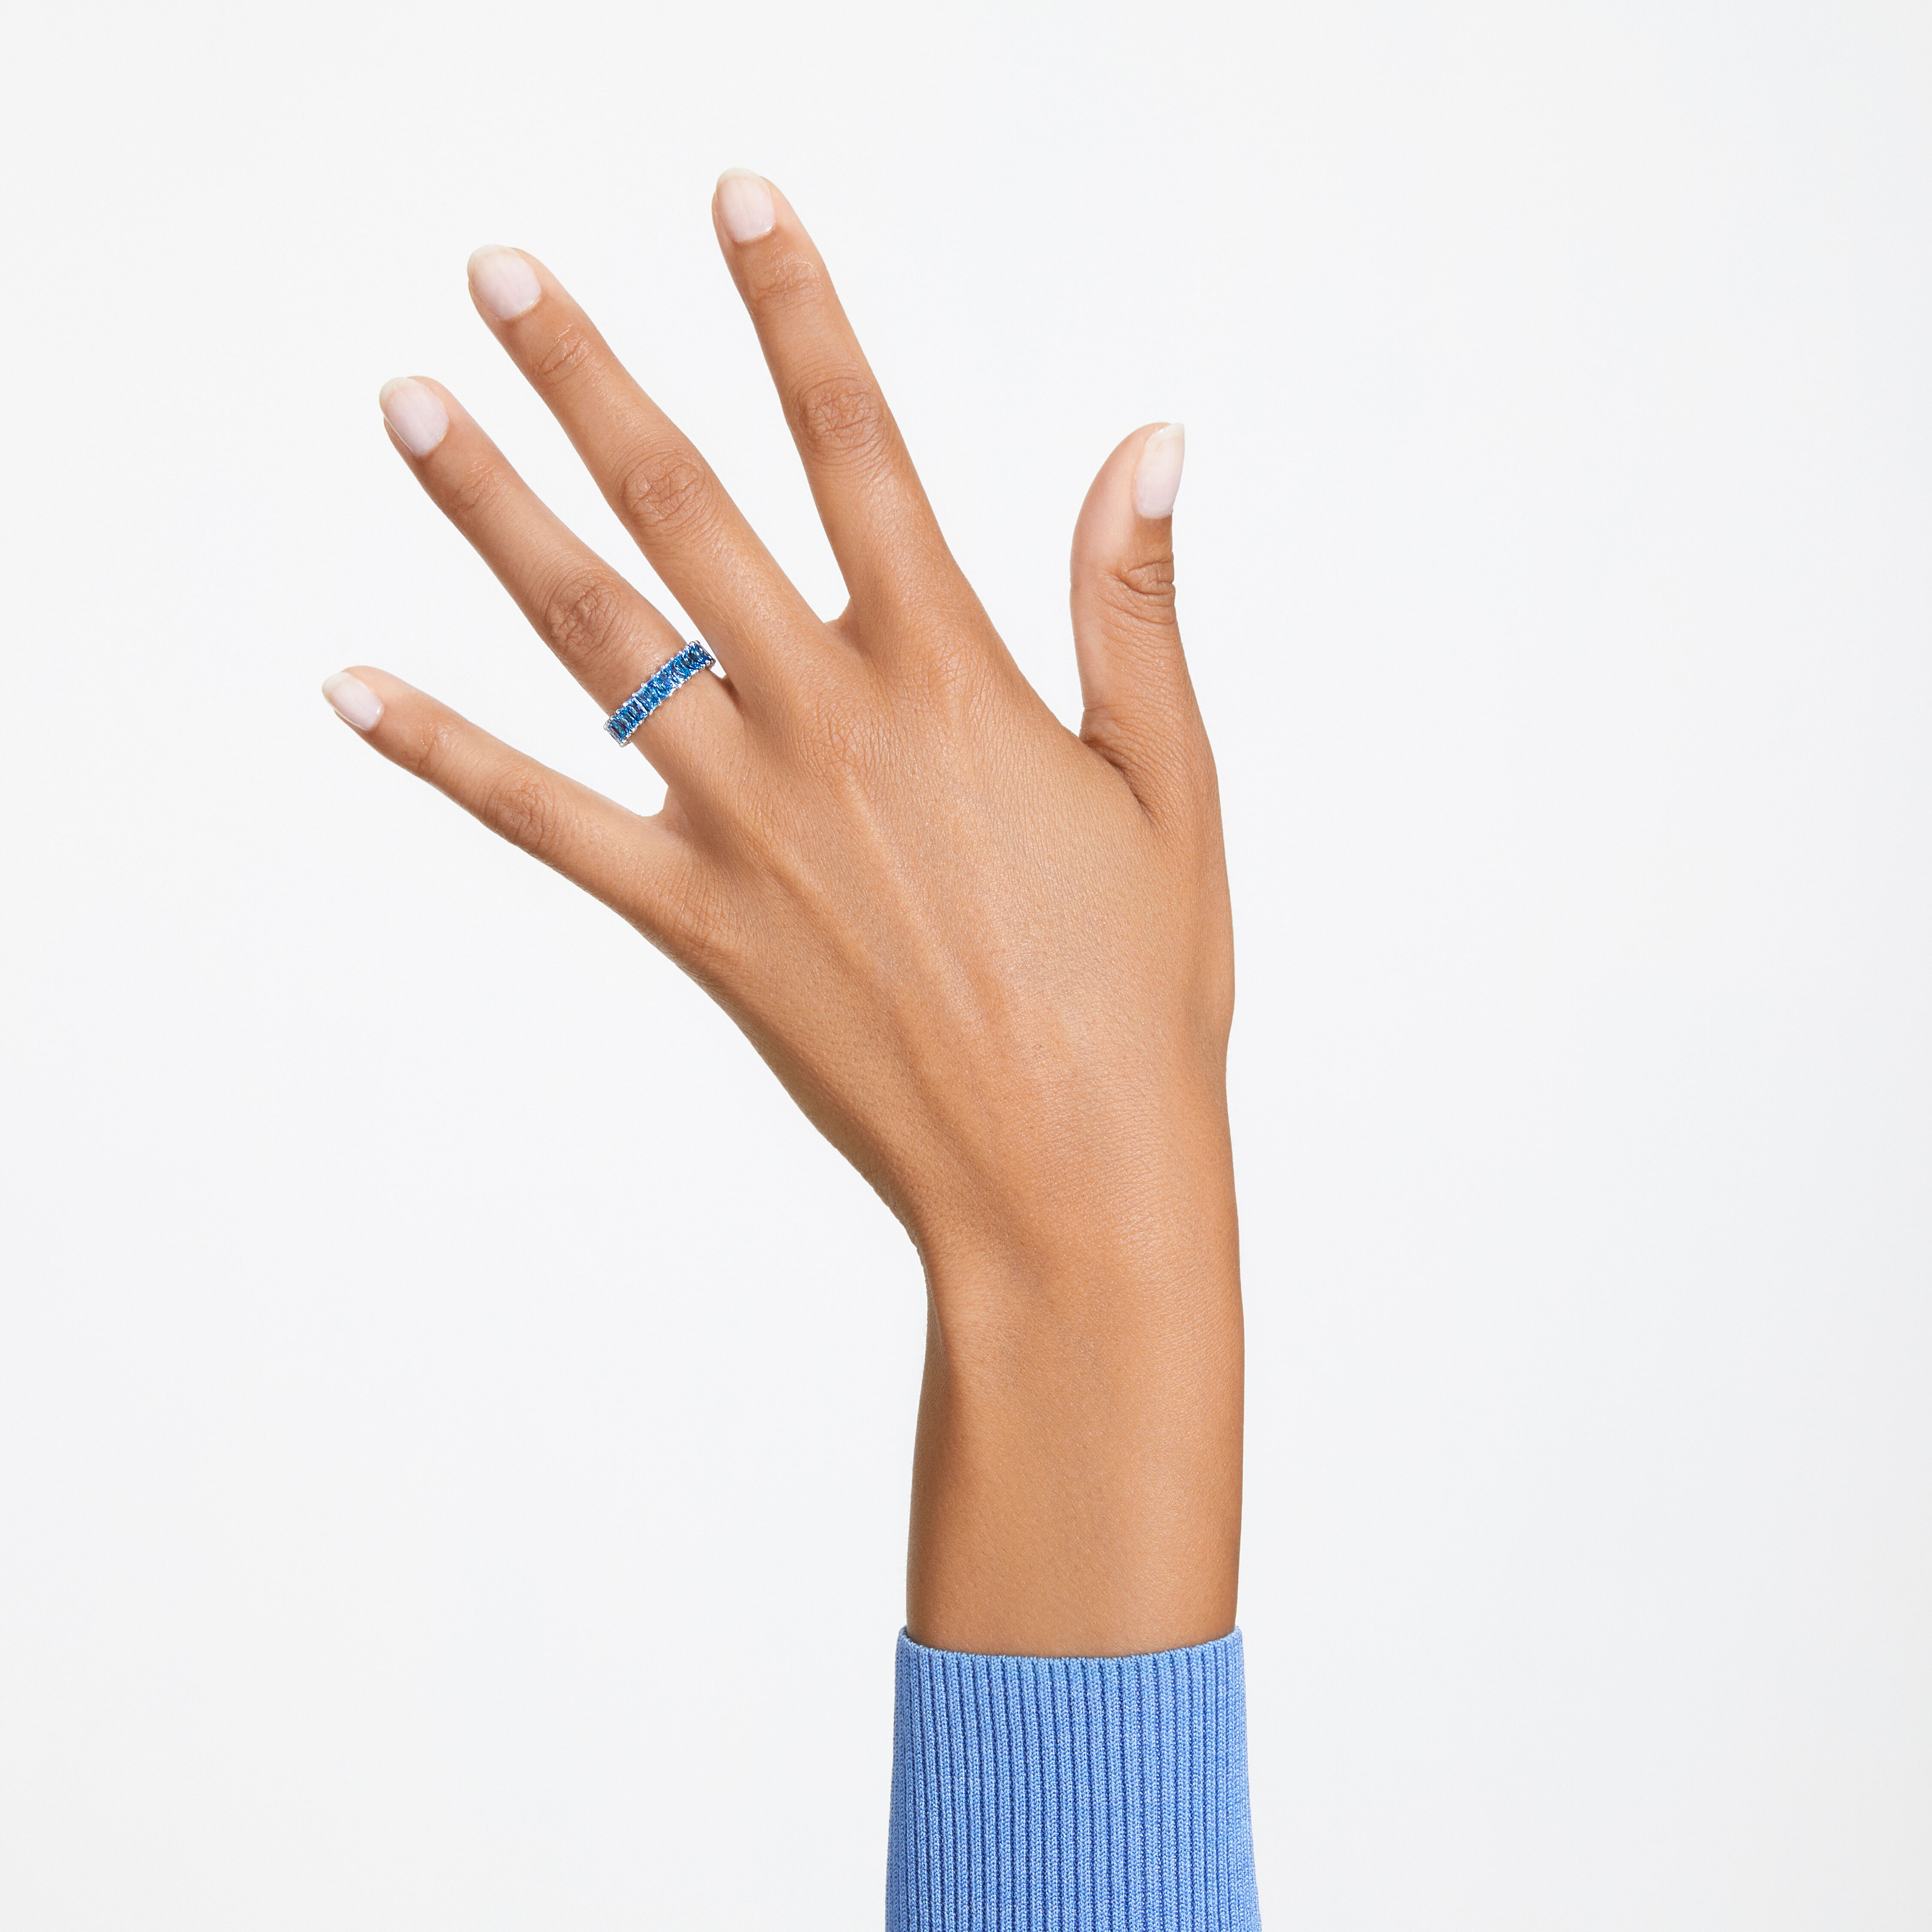 Can Swarovski rings be worn everyday? Care tips for five scenarios